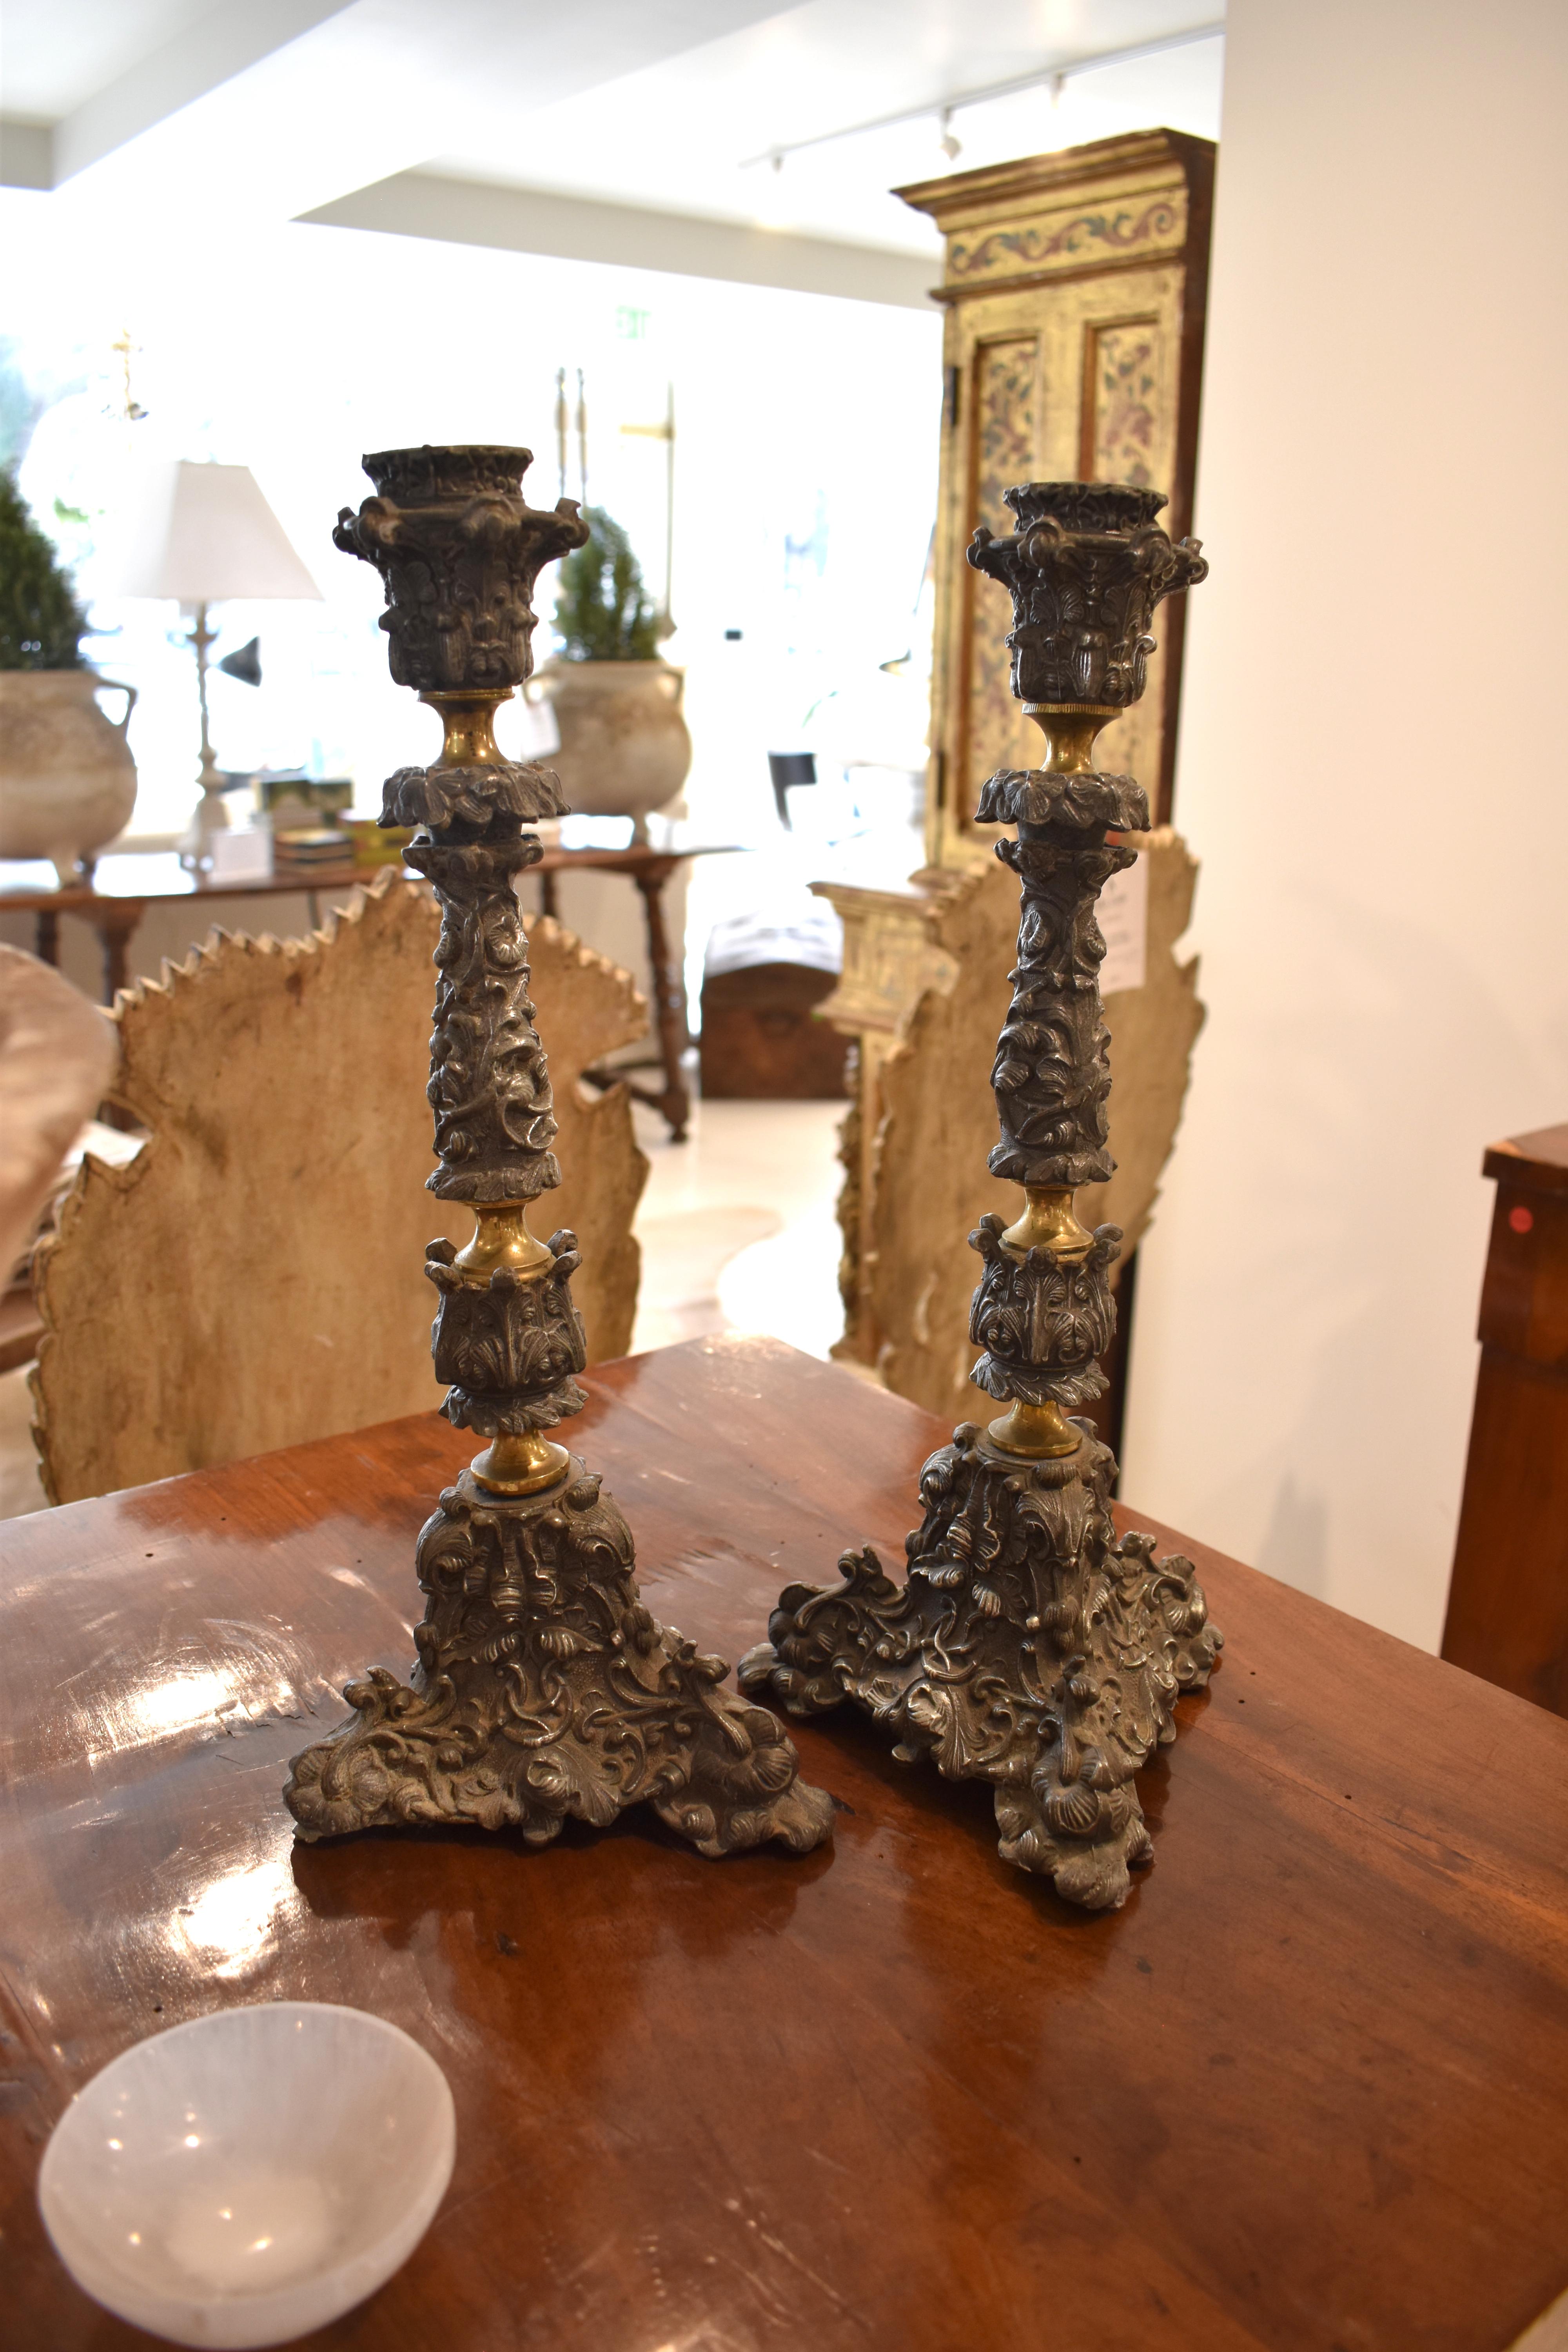 Pair of 19th century French elaborately carved Pewter candlesticks on tripod bases.